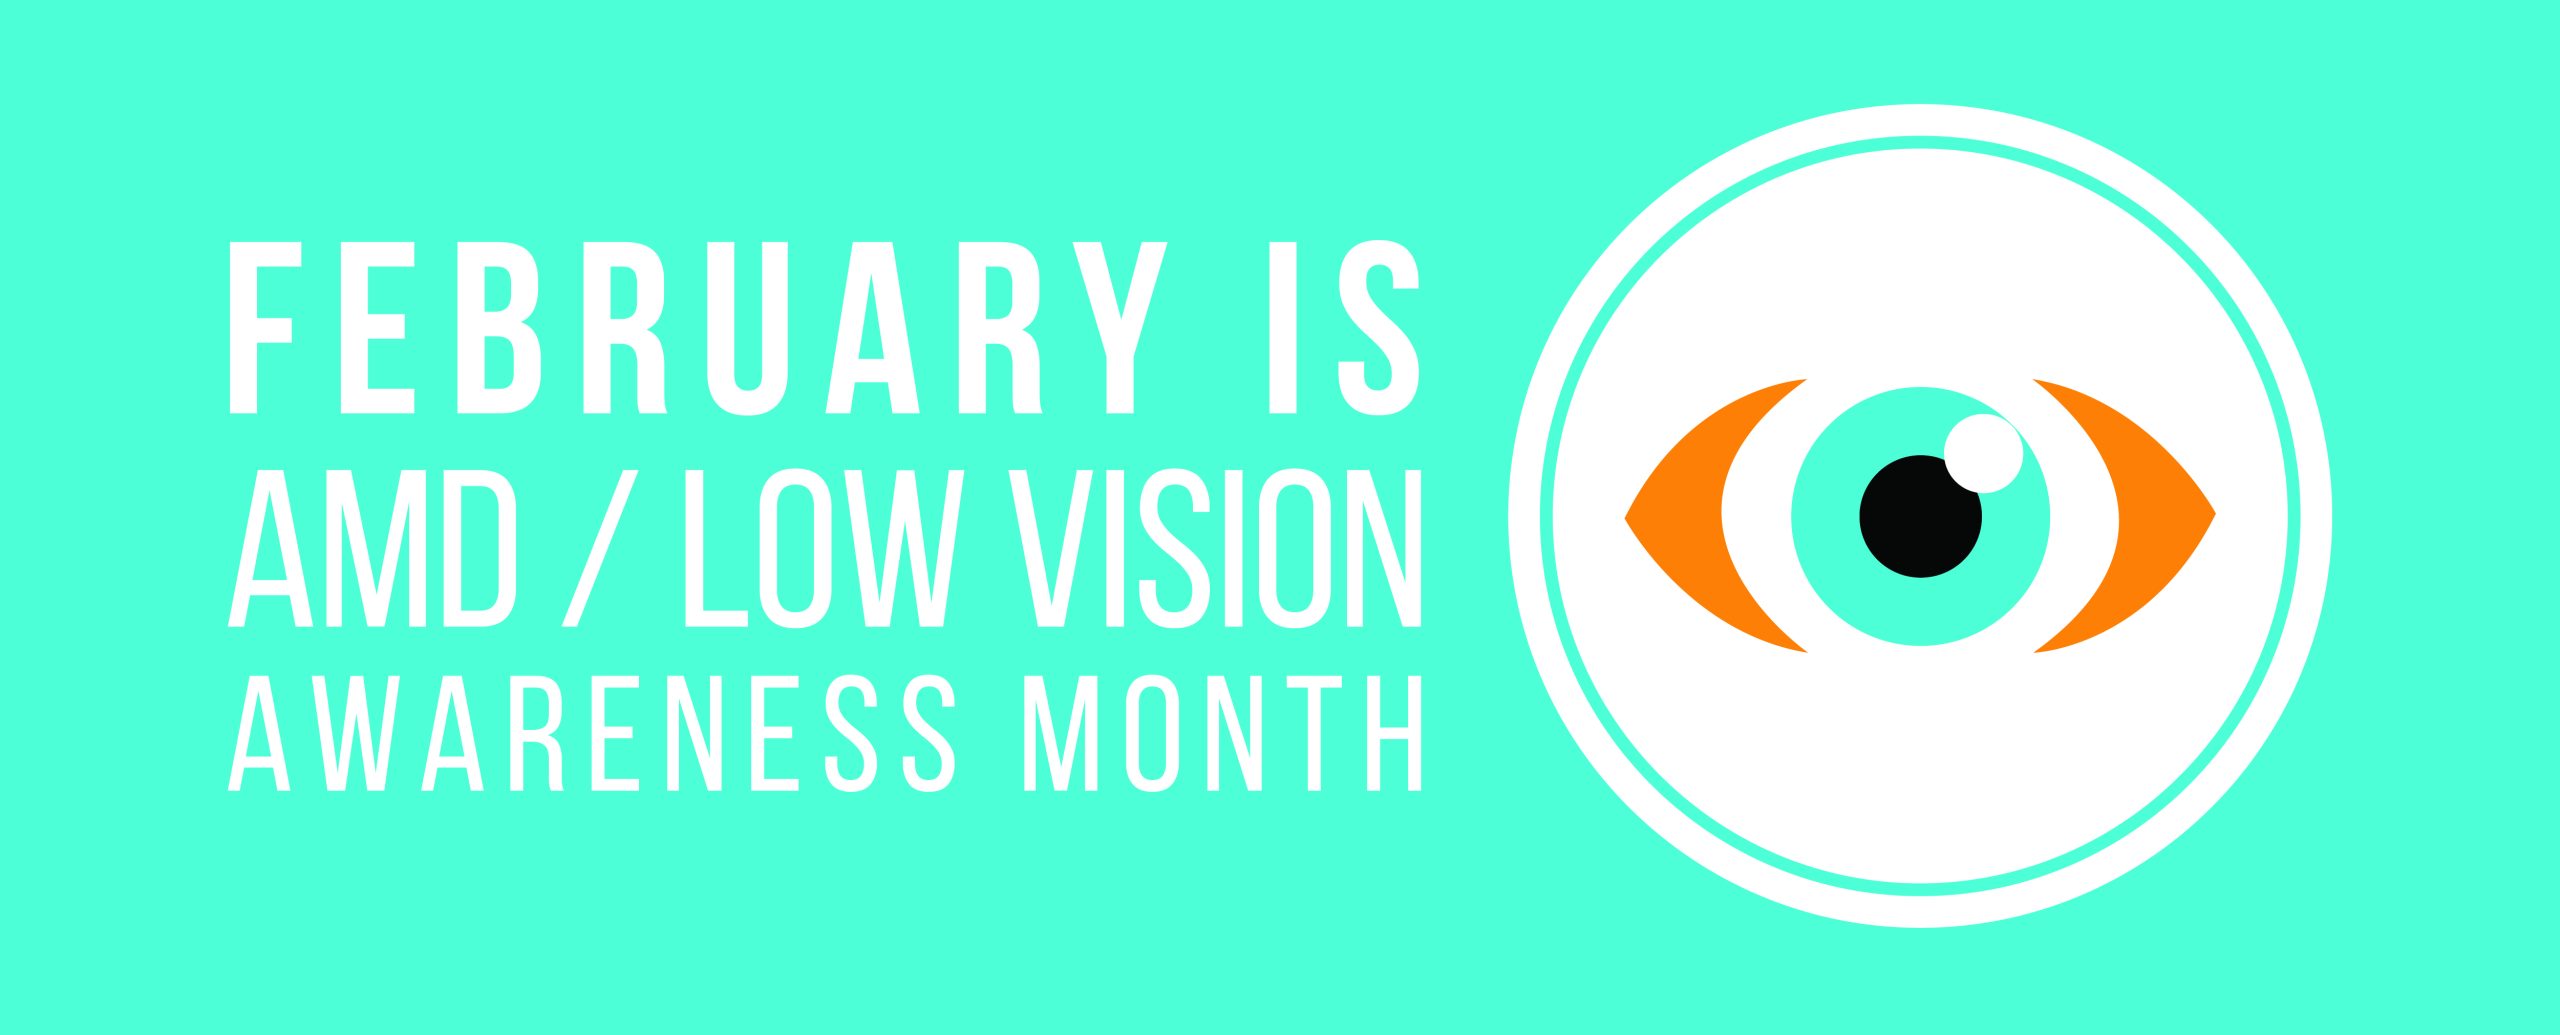 February is AMD/Low Vision Awareness Month Discovery Eye Foundation